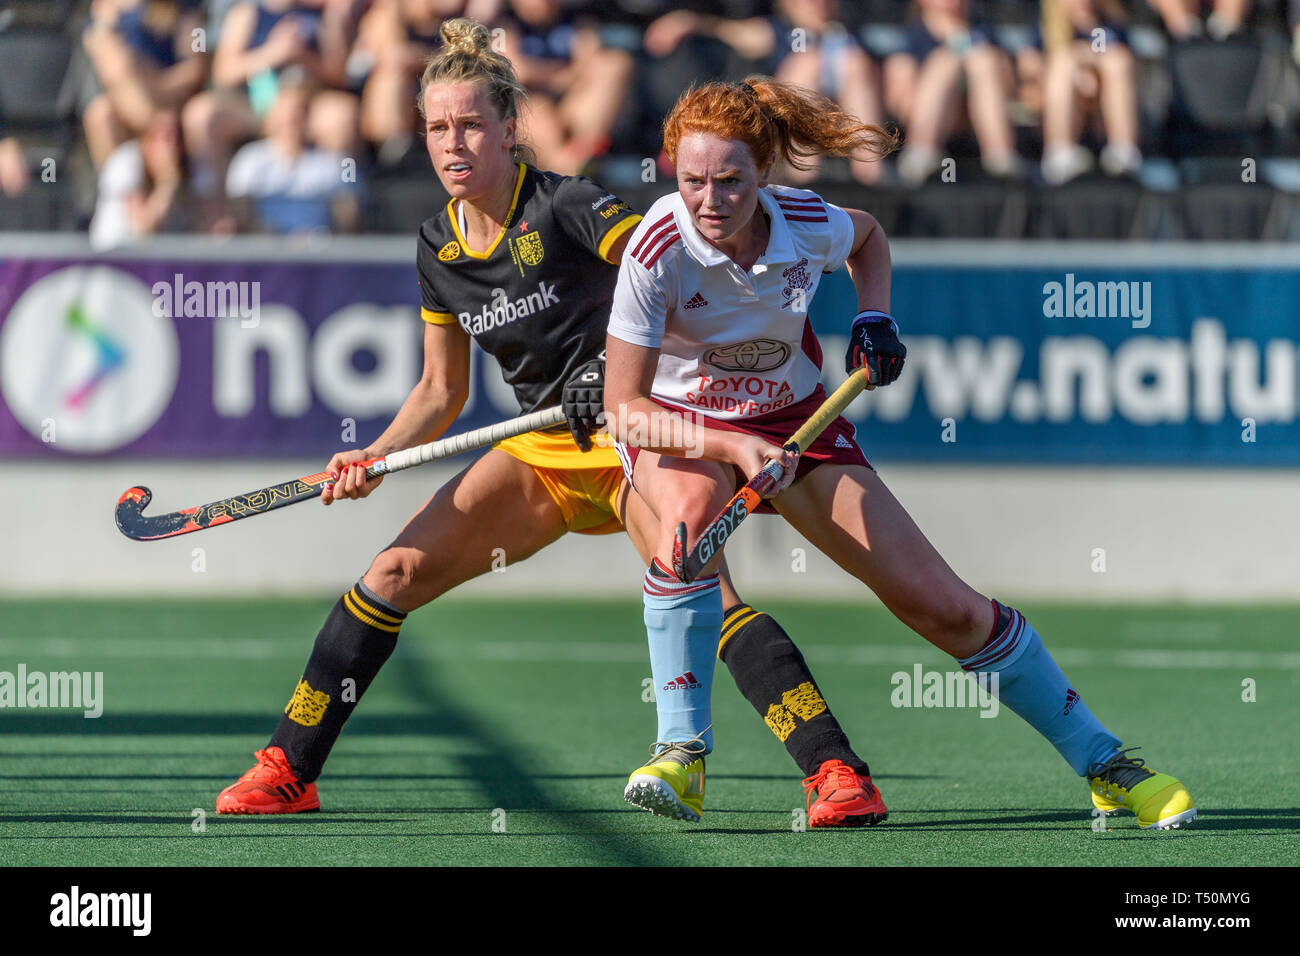 Amsterdam, Netherlands. 19th Apr, 2019. AMSTERDAM, 19-04-2019, Euro Hockey Club Cup 2019. Venue: Wagener Stadion. Lieke Hulsen and Kate Crotty during the game HC Den Bosch vs Loreto HC. Credit: Pro Shots/Alamy Live News Stock Photo